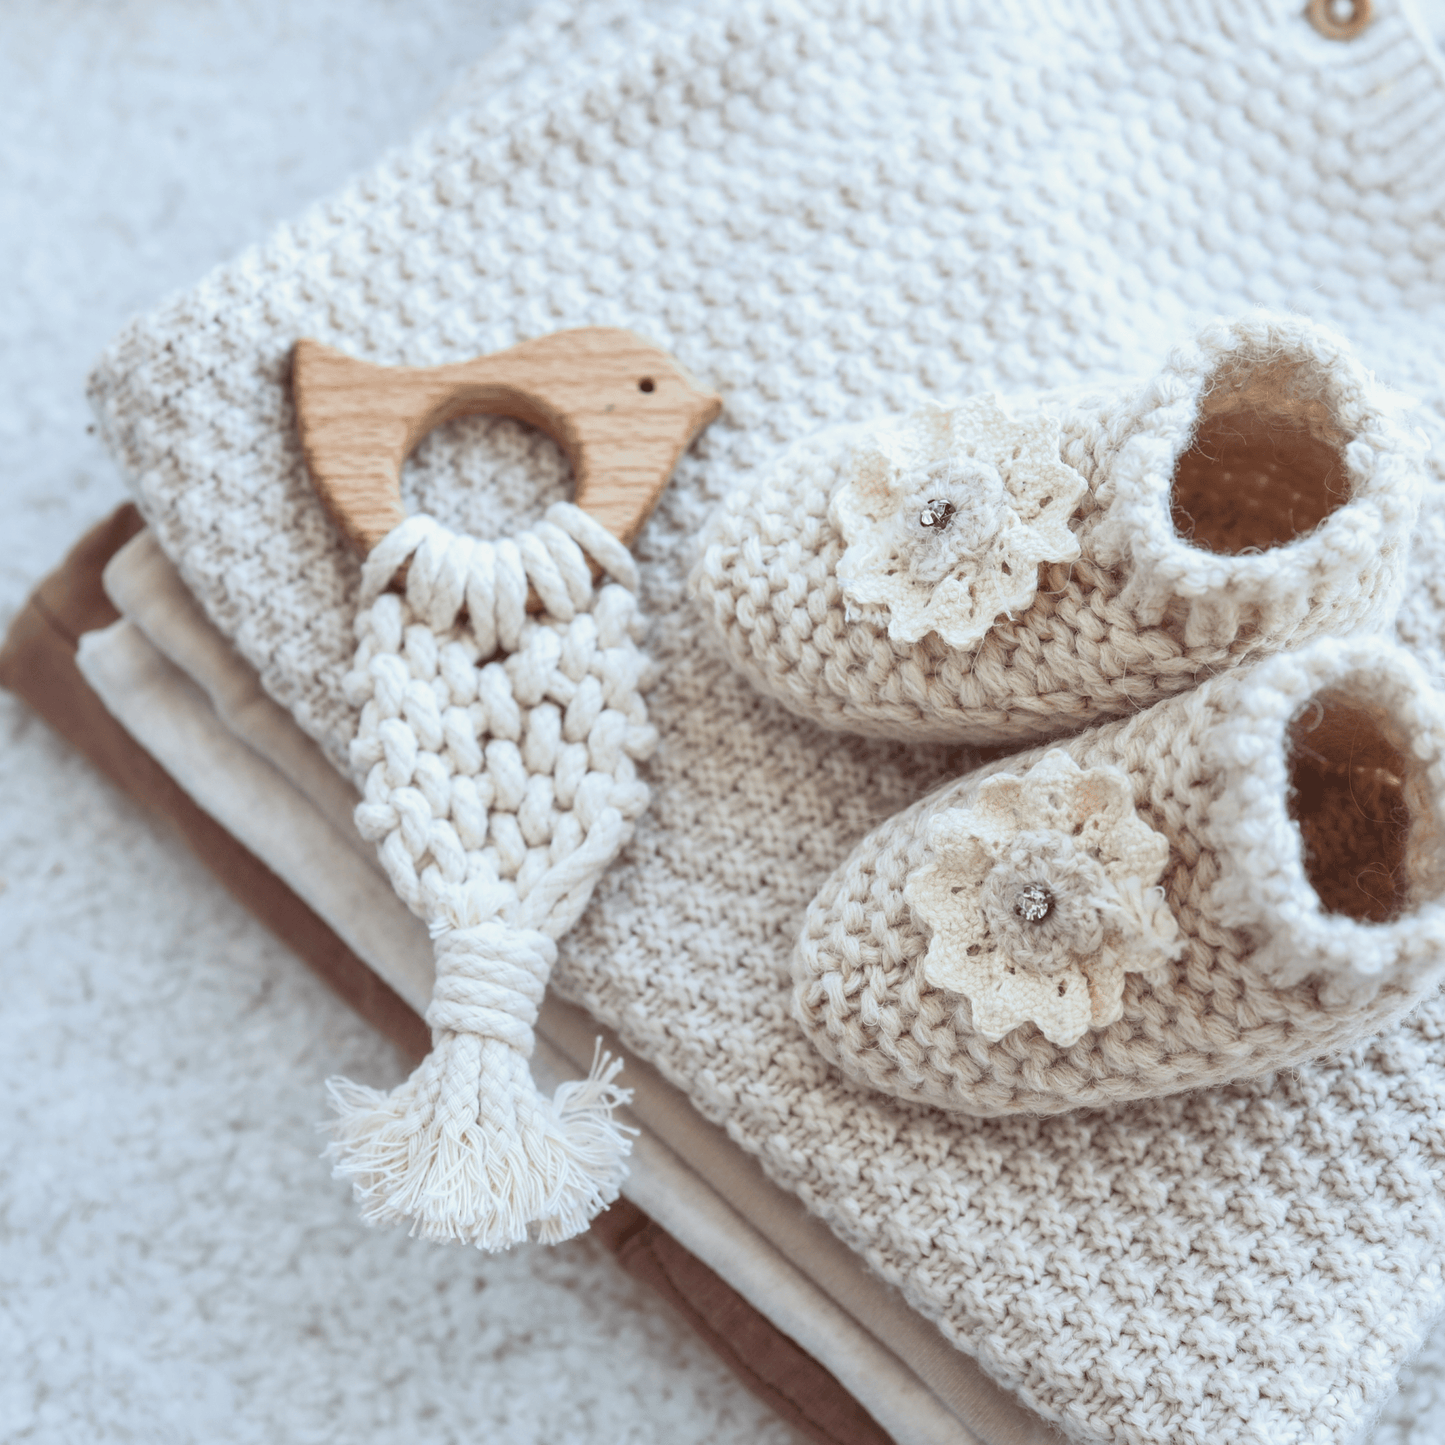 Knitted baby booties with floral appliqué, a wooden bird teether, and folded blankets on a textured surface. 
Product Name: [6-Month-Prepaid] Hooks & Needles Subscription Box #24